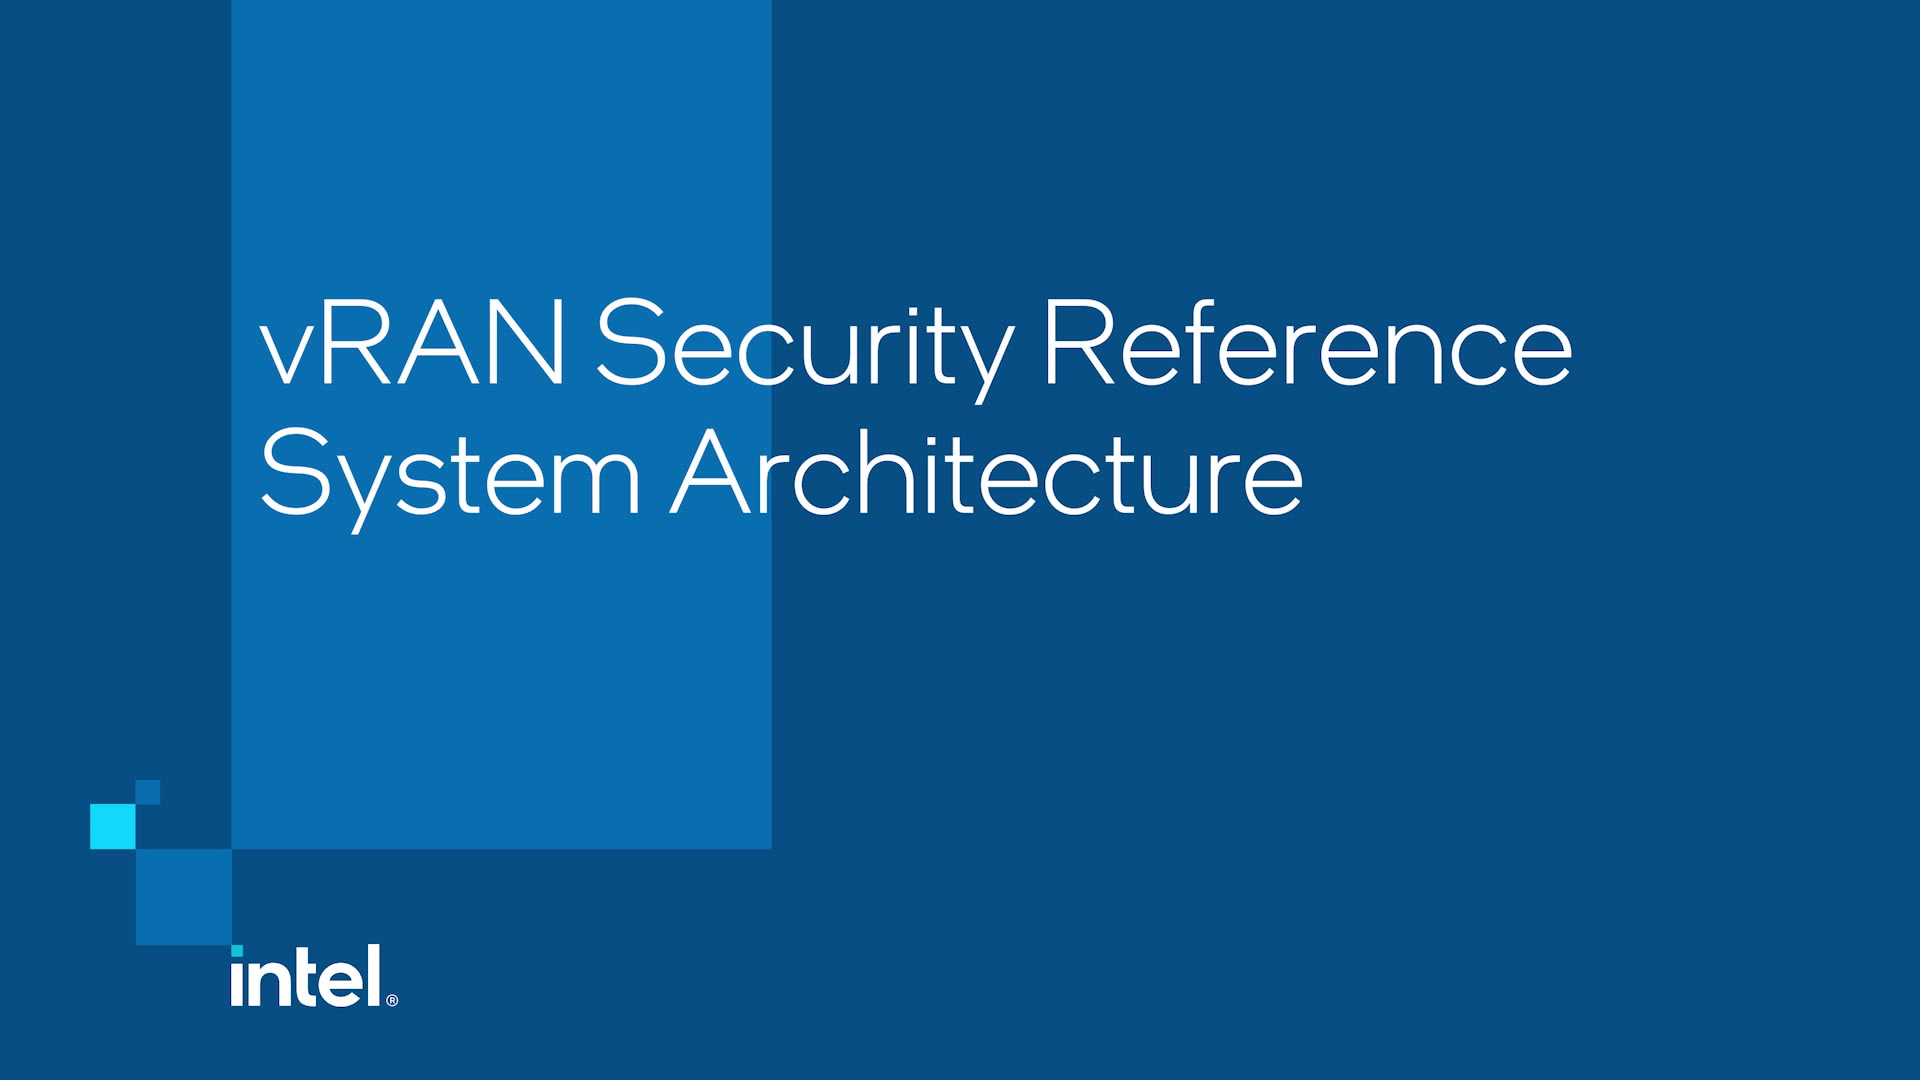 vRAN Security Reference System Architecture